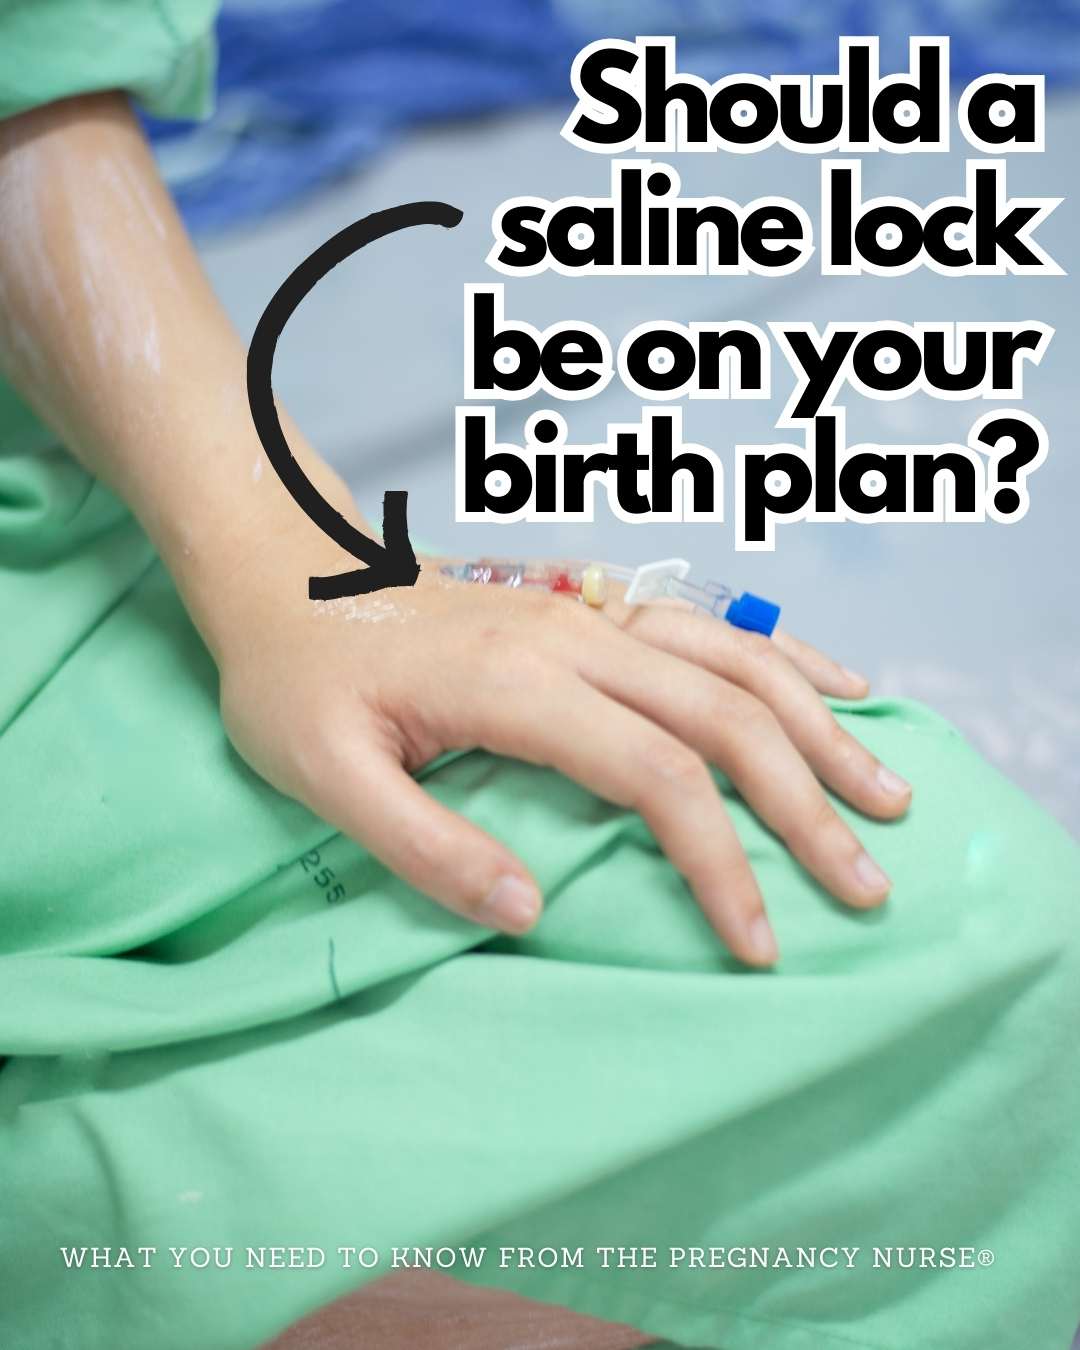 Are you a soon-to-be mom looking for more autonomy during your labor? This informative pin is all about the saline lock. It's meant for lower risk births, and leaves just a port for quick medication access without a constant tube in your arm. Learn who can use it, its pros and cons, where it goes, and how to find out if it's right for you.